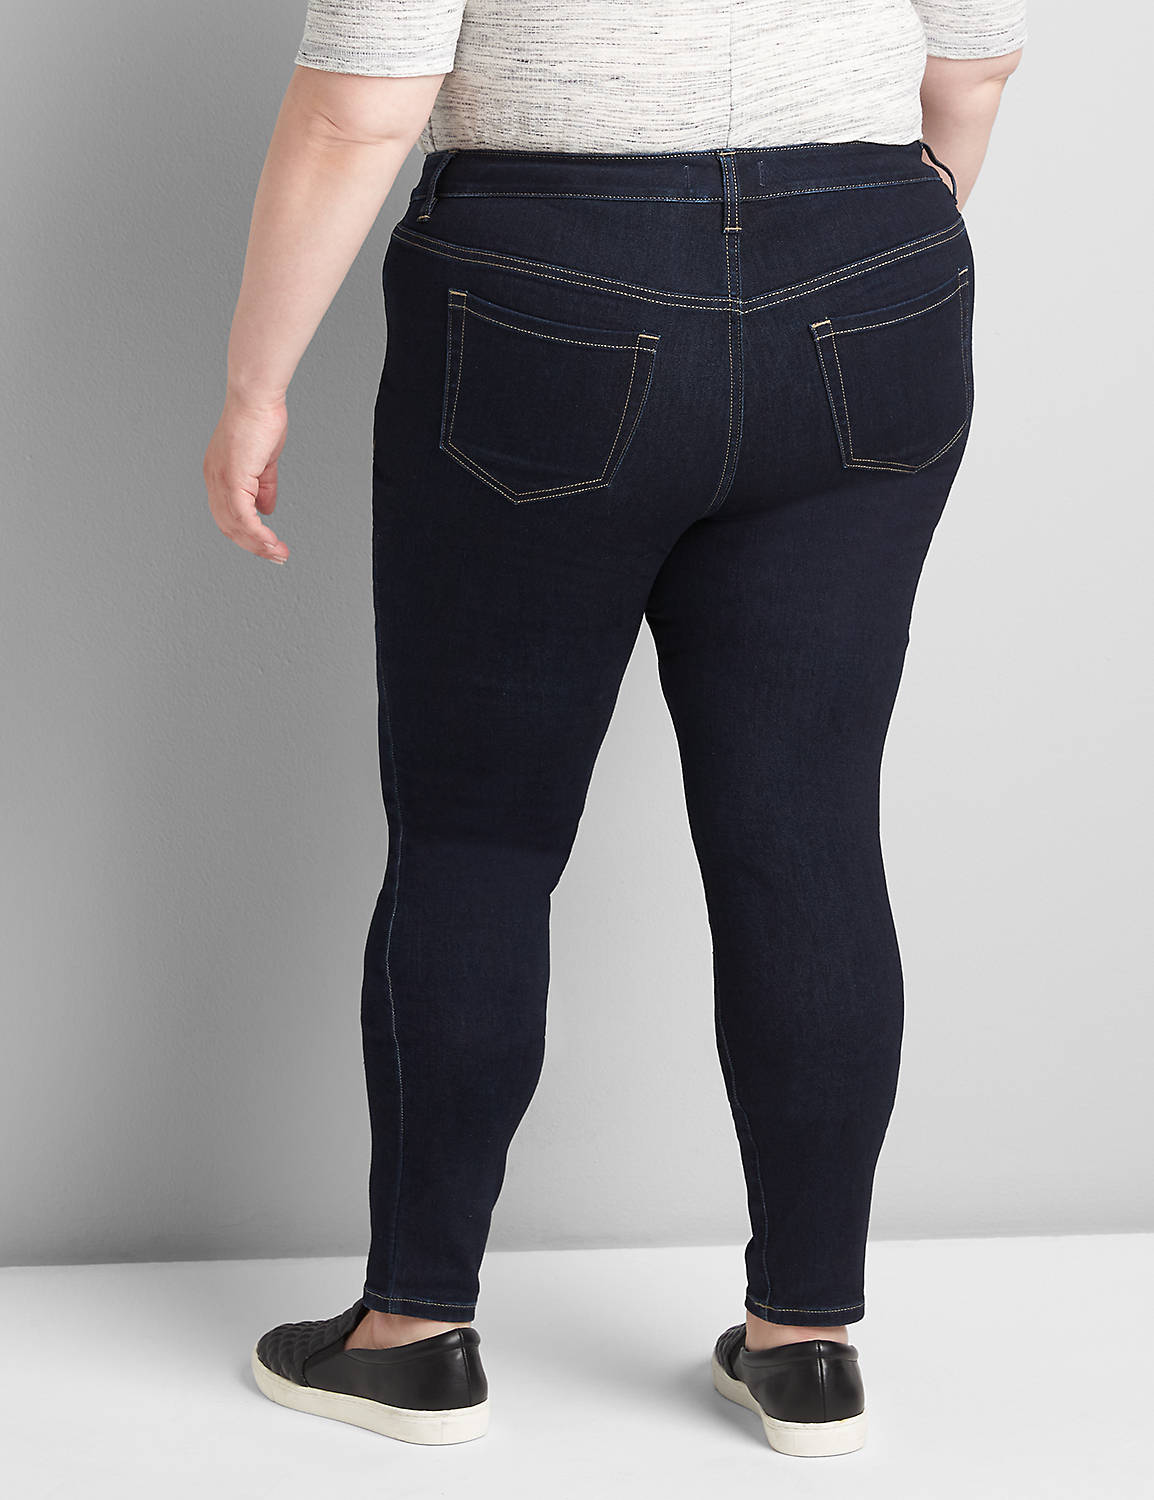 Straight Fit High-Rise Skinny Jean - Dark Wash Product Image 2